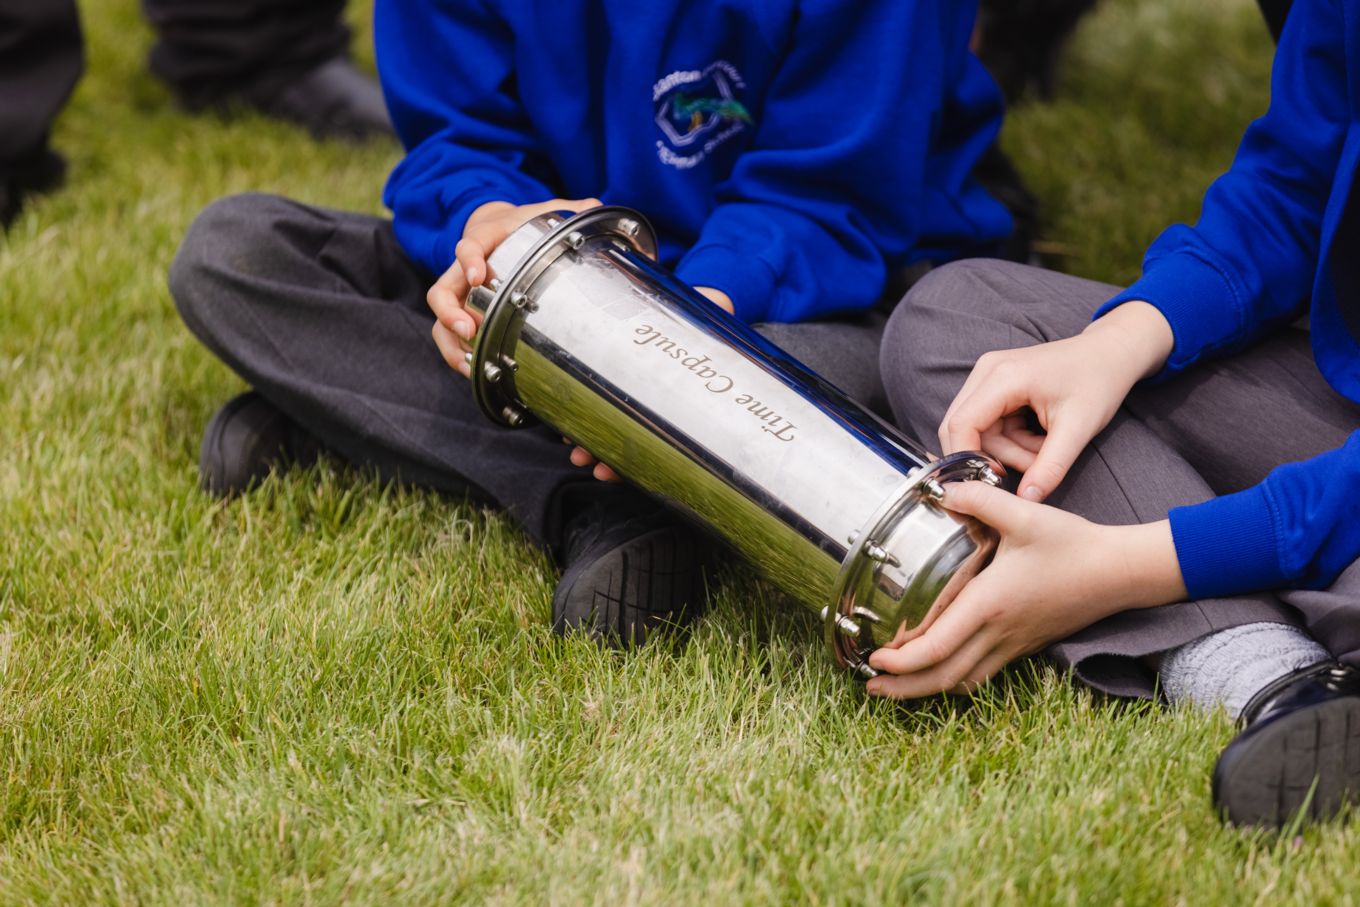 The time capsule, filled with the work of children from Stanton Harcourt C of E Primary School